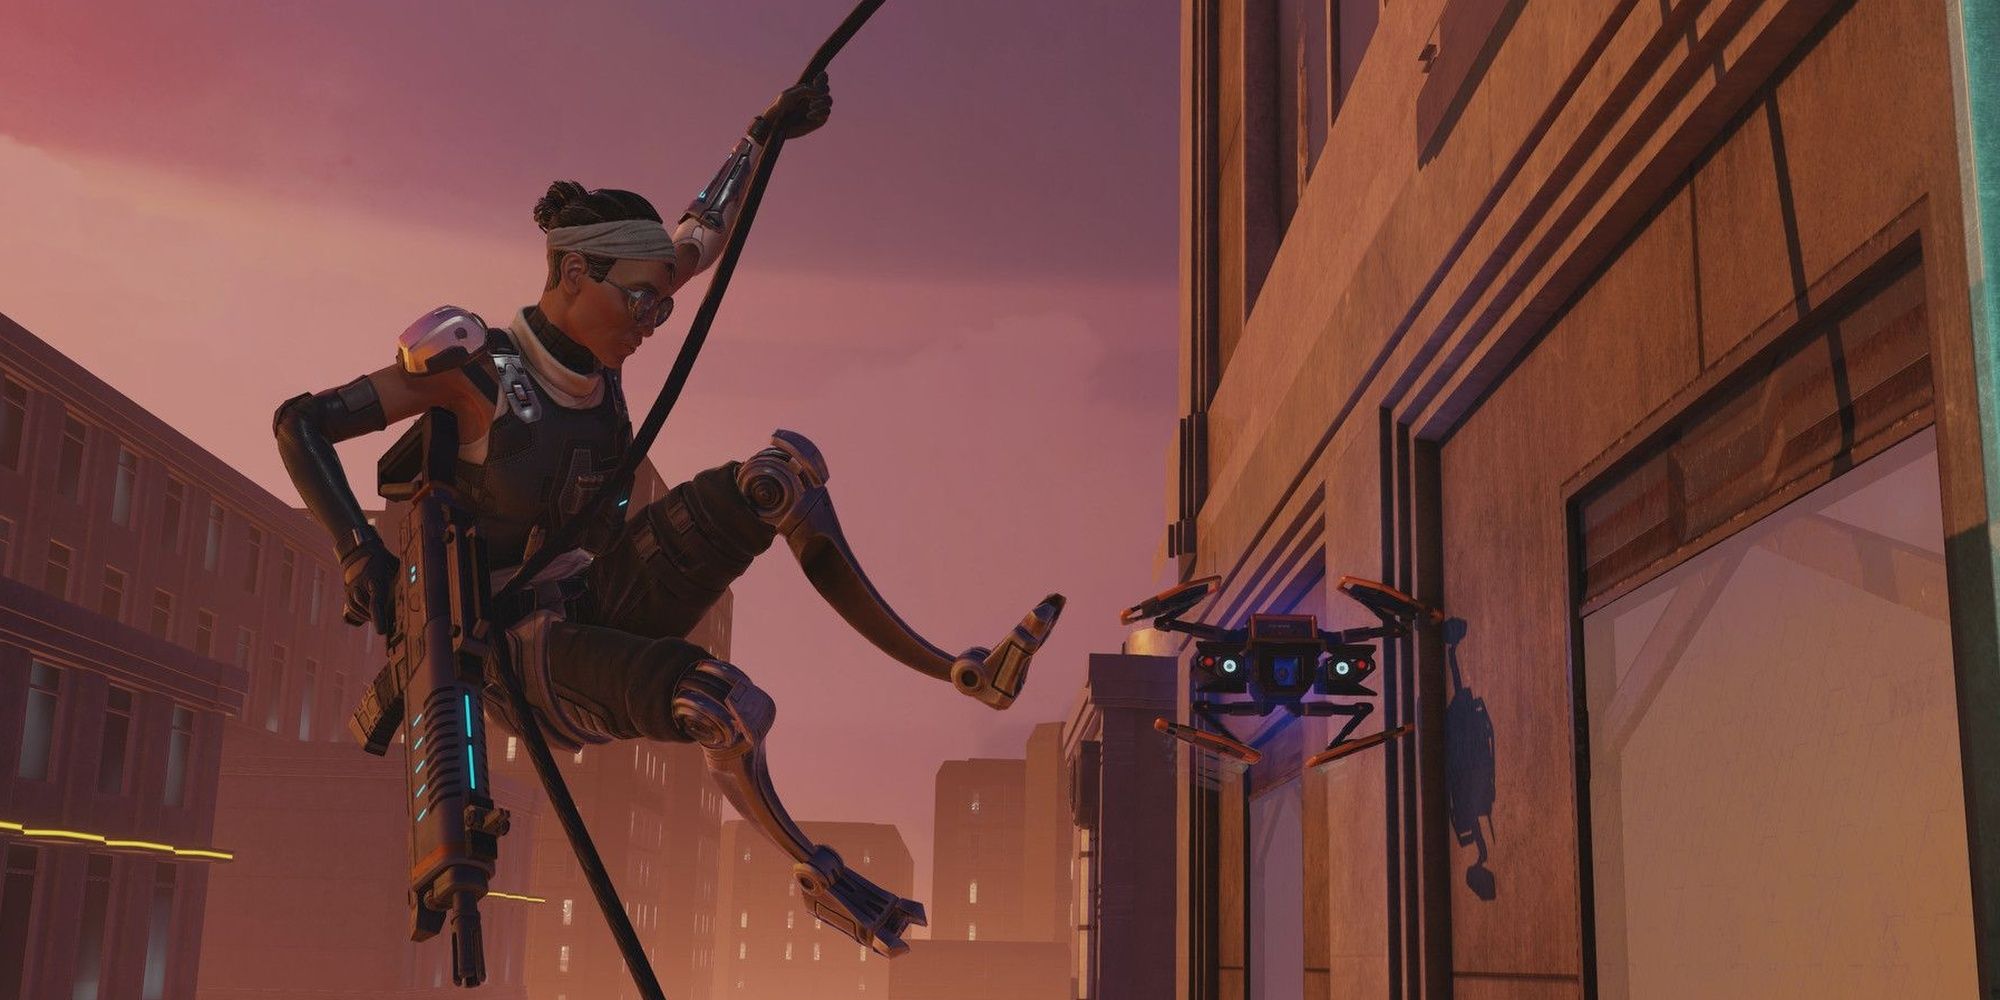 Xcom2: Specialist Roping In To Fight